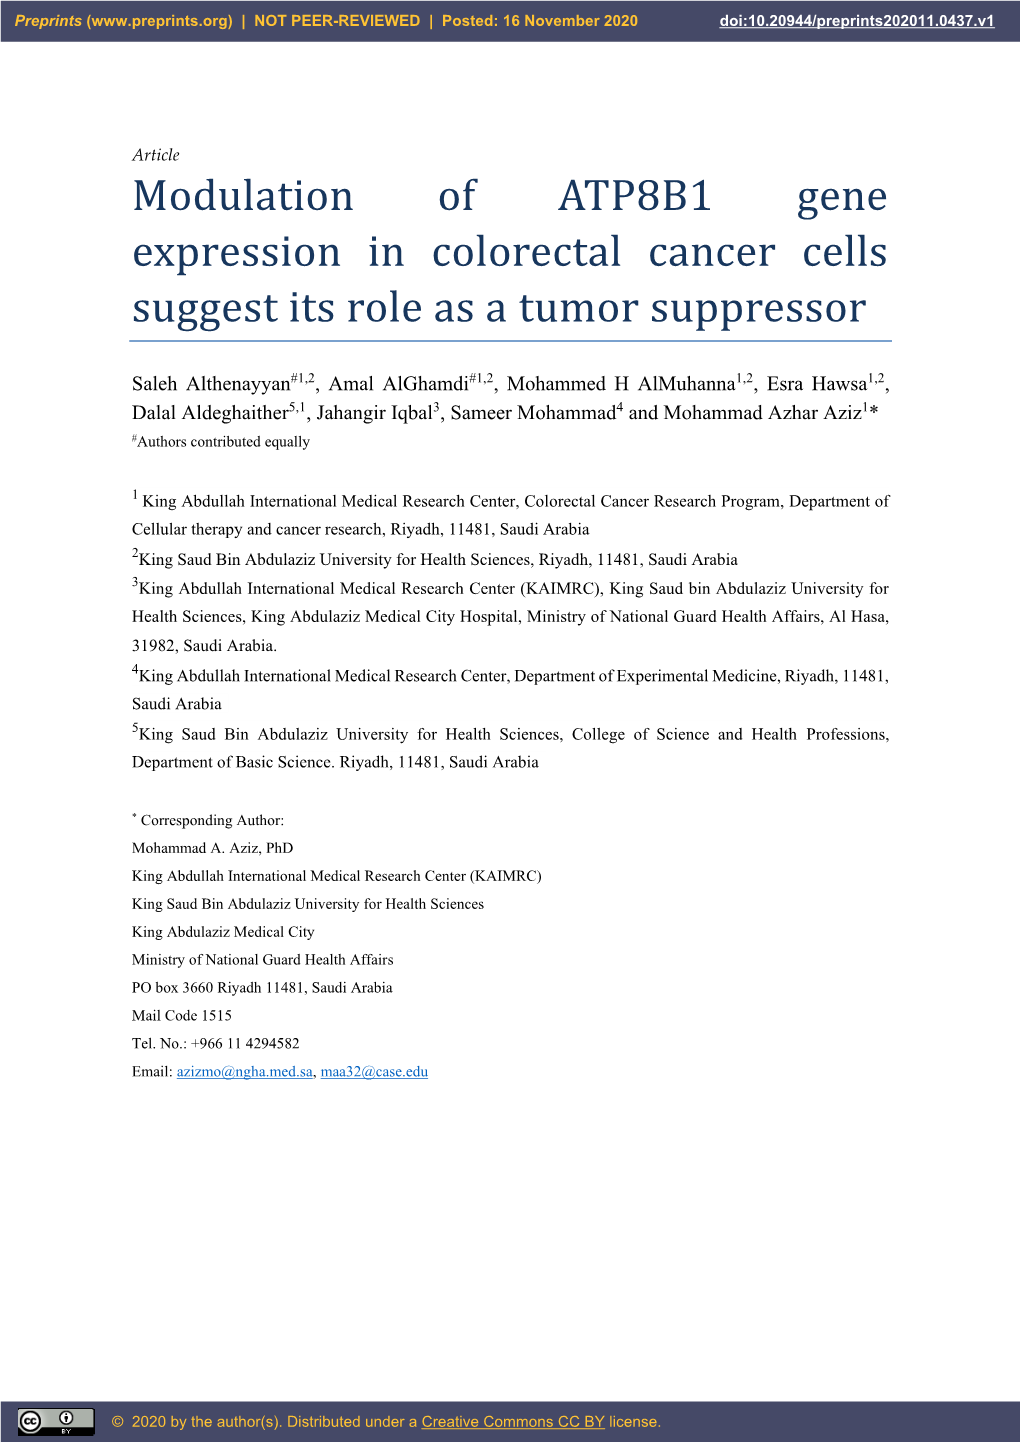 Modulation of ATP8B1 Gene Expression in Colorectal Cancer Cells Suggest Its Role As a Tumor Suppressor